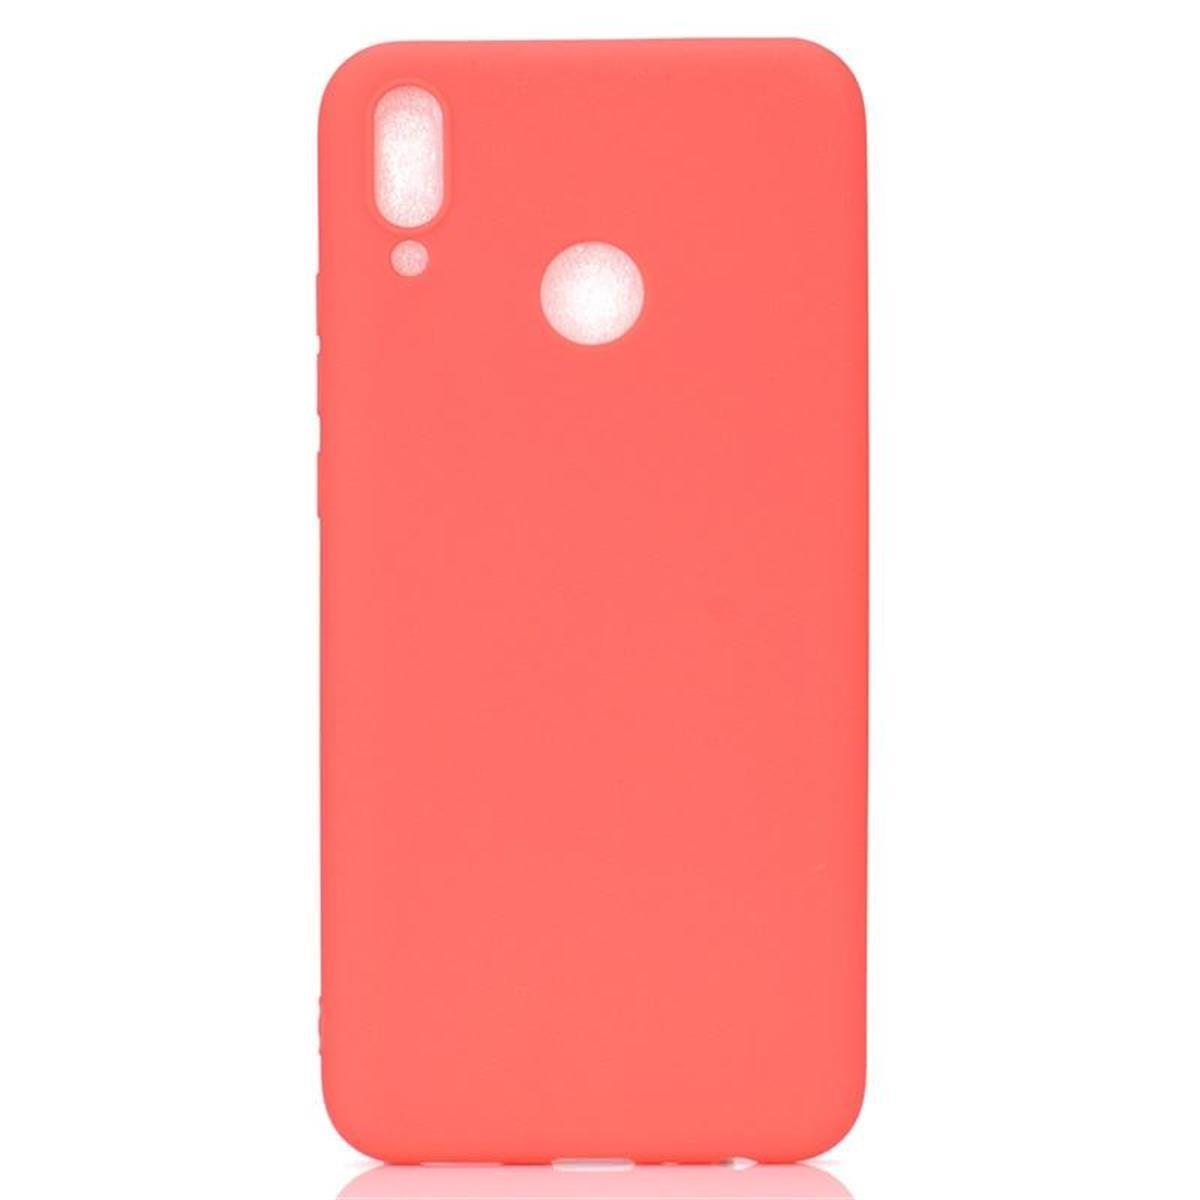 COVERKINGZ Handycase aus Silikon, Backcover, (2019), Huawei, Rot Y9